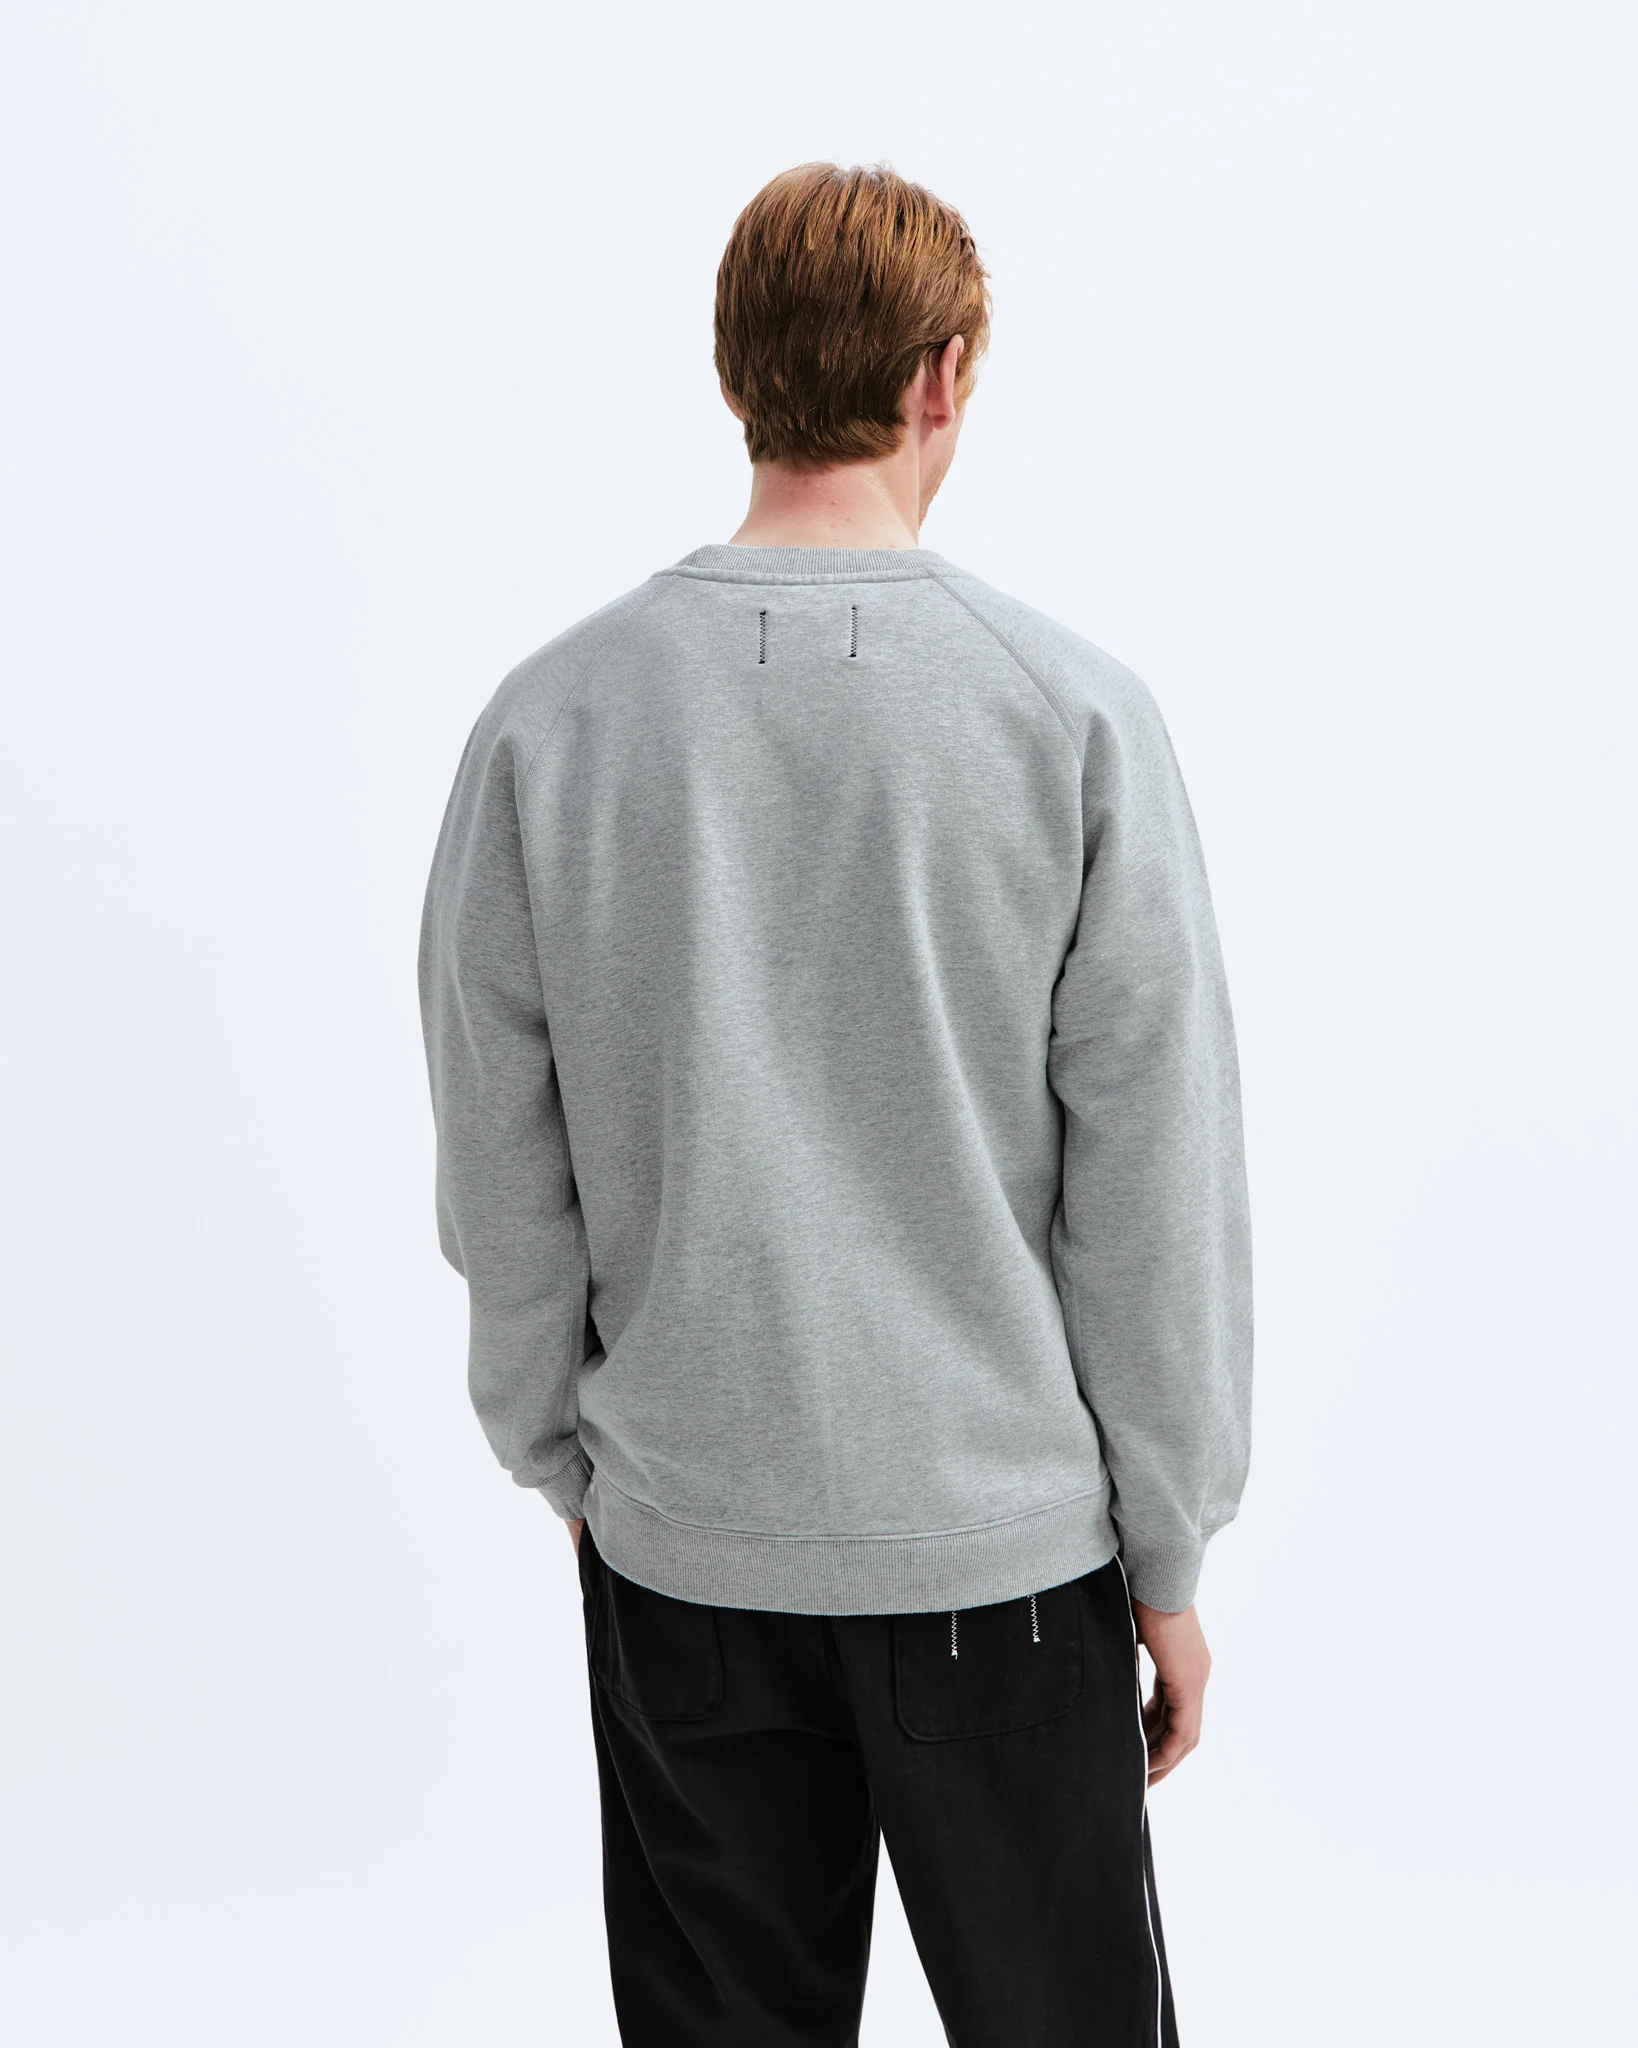 Midweight Terry Classic Crewneck - Heather Grey - Reigning Champ - Danali - RC-3883